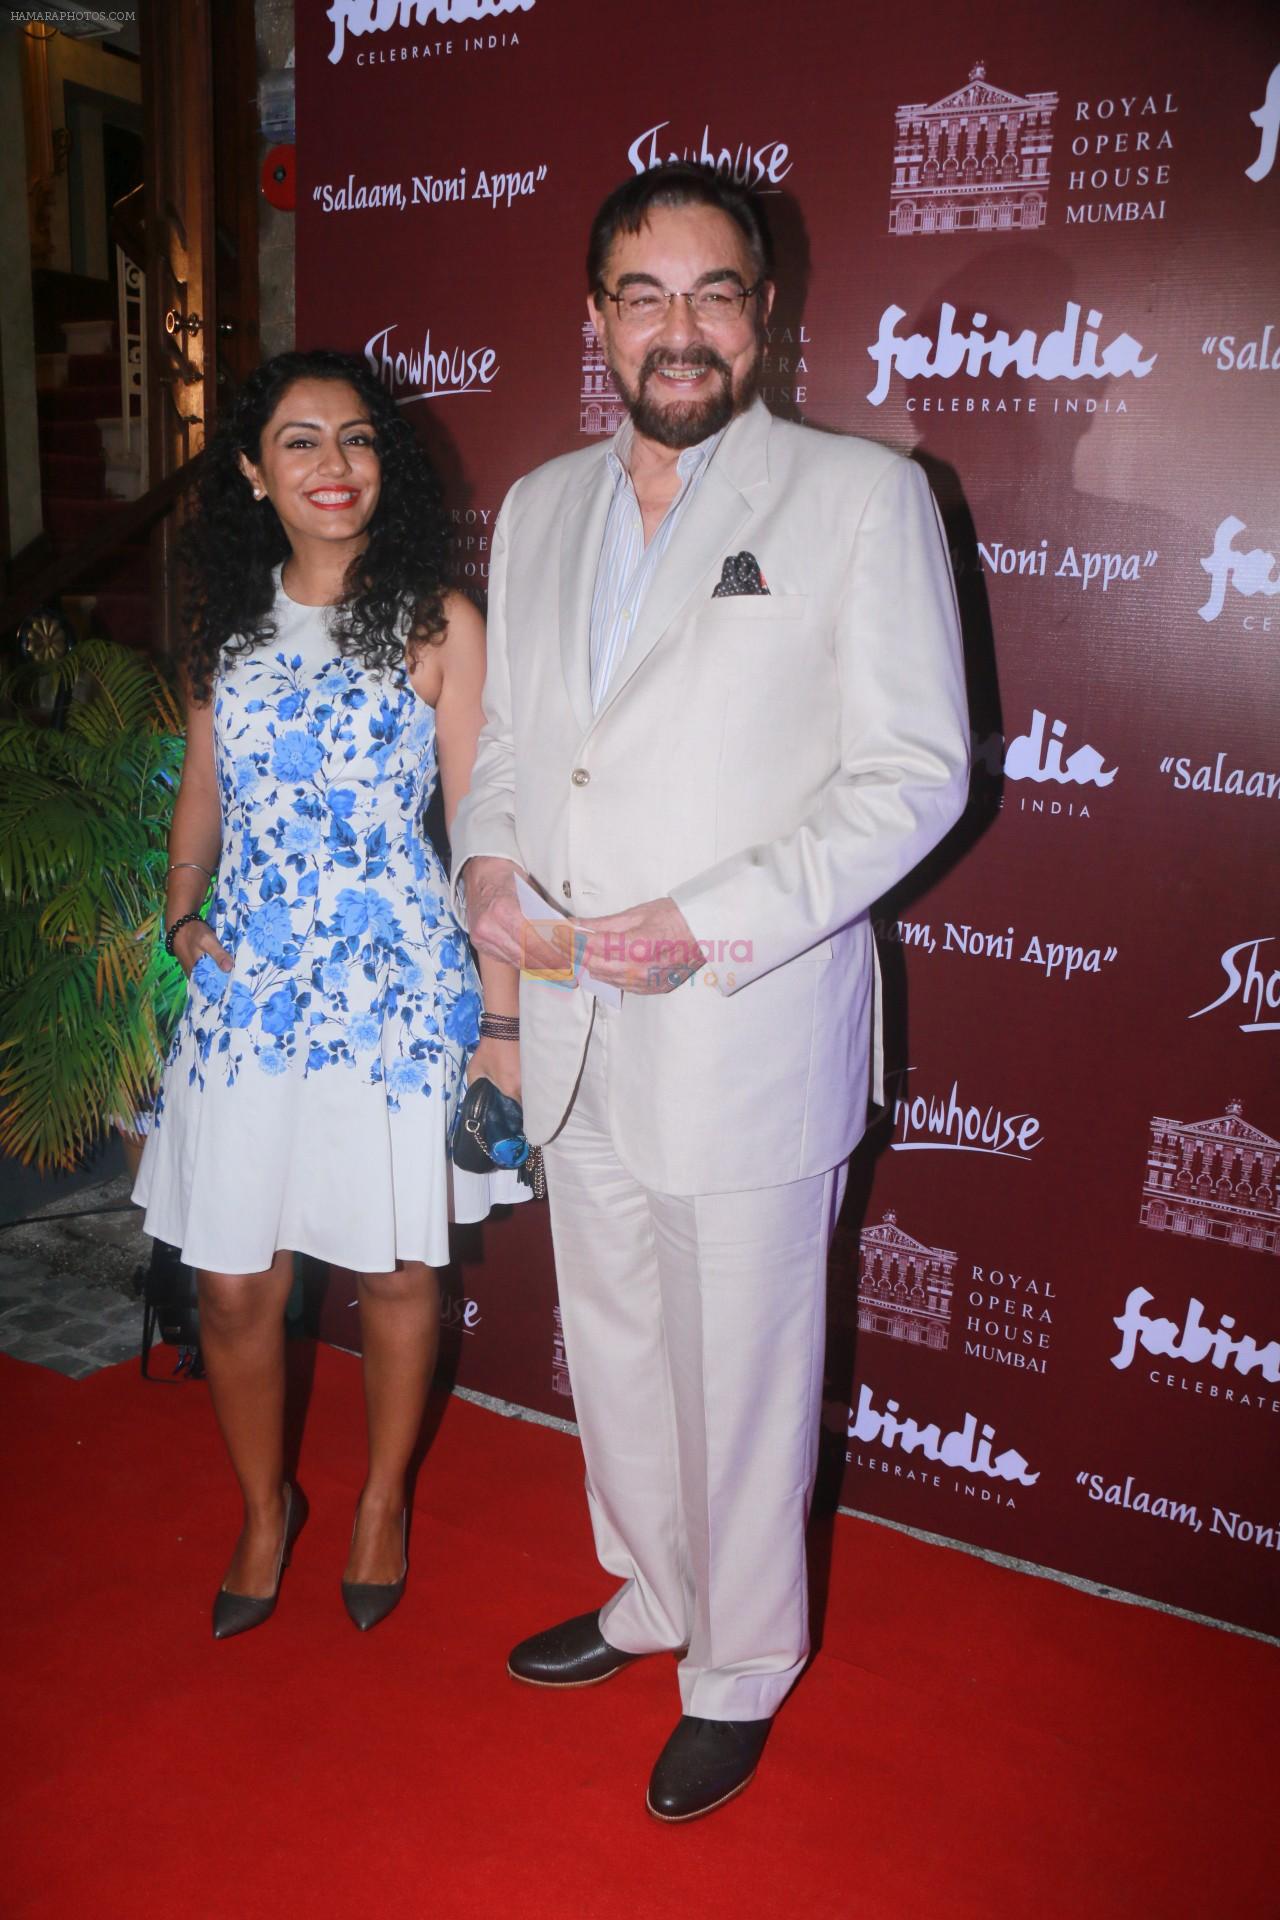 Kabir Bedi, Parveen Dusanj at the Special preview of Salaam Noni Appa based on Twinkle Khanna's novel at Royal Opera House in mumbai on 28th Oct 2017